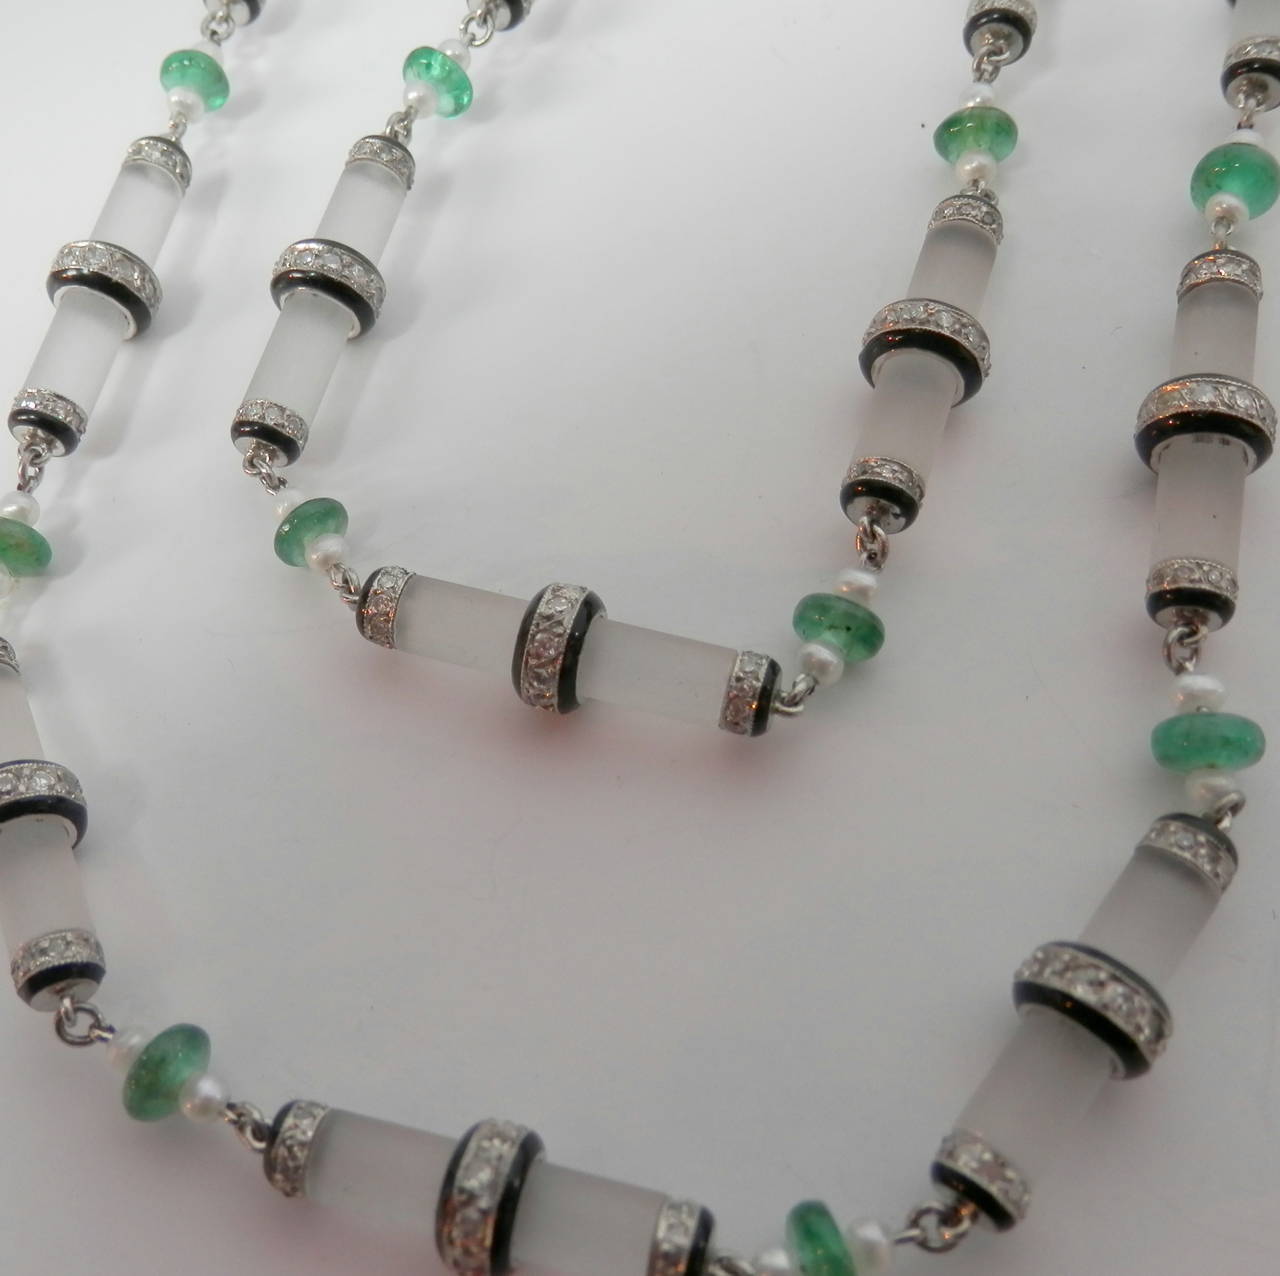 20 Frosted rock crystal accented with small diamond roundels further accented with black enamel.  Interspersed are 20 small emerald beads with small white pearls on either side. 26 inches long.